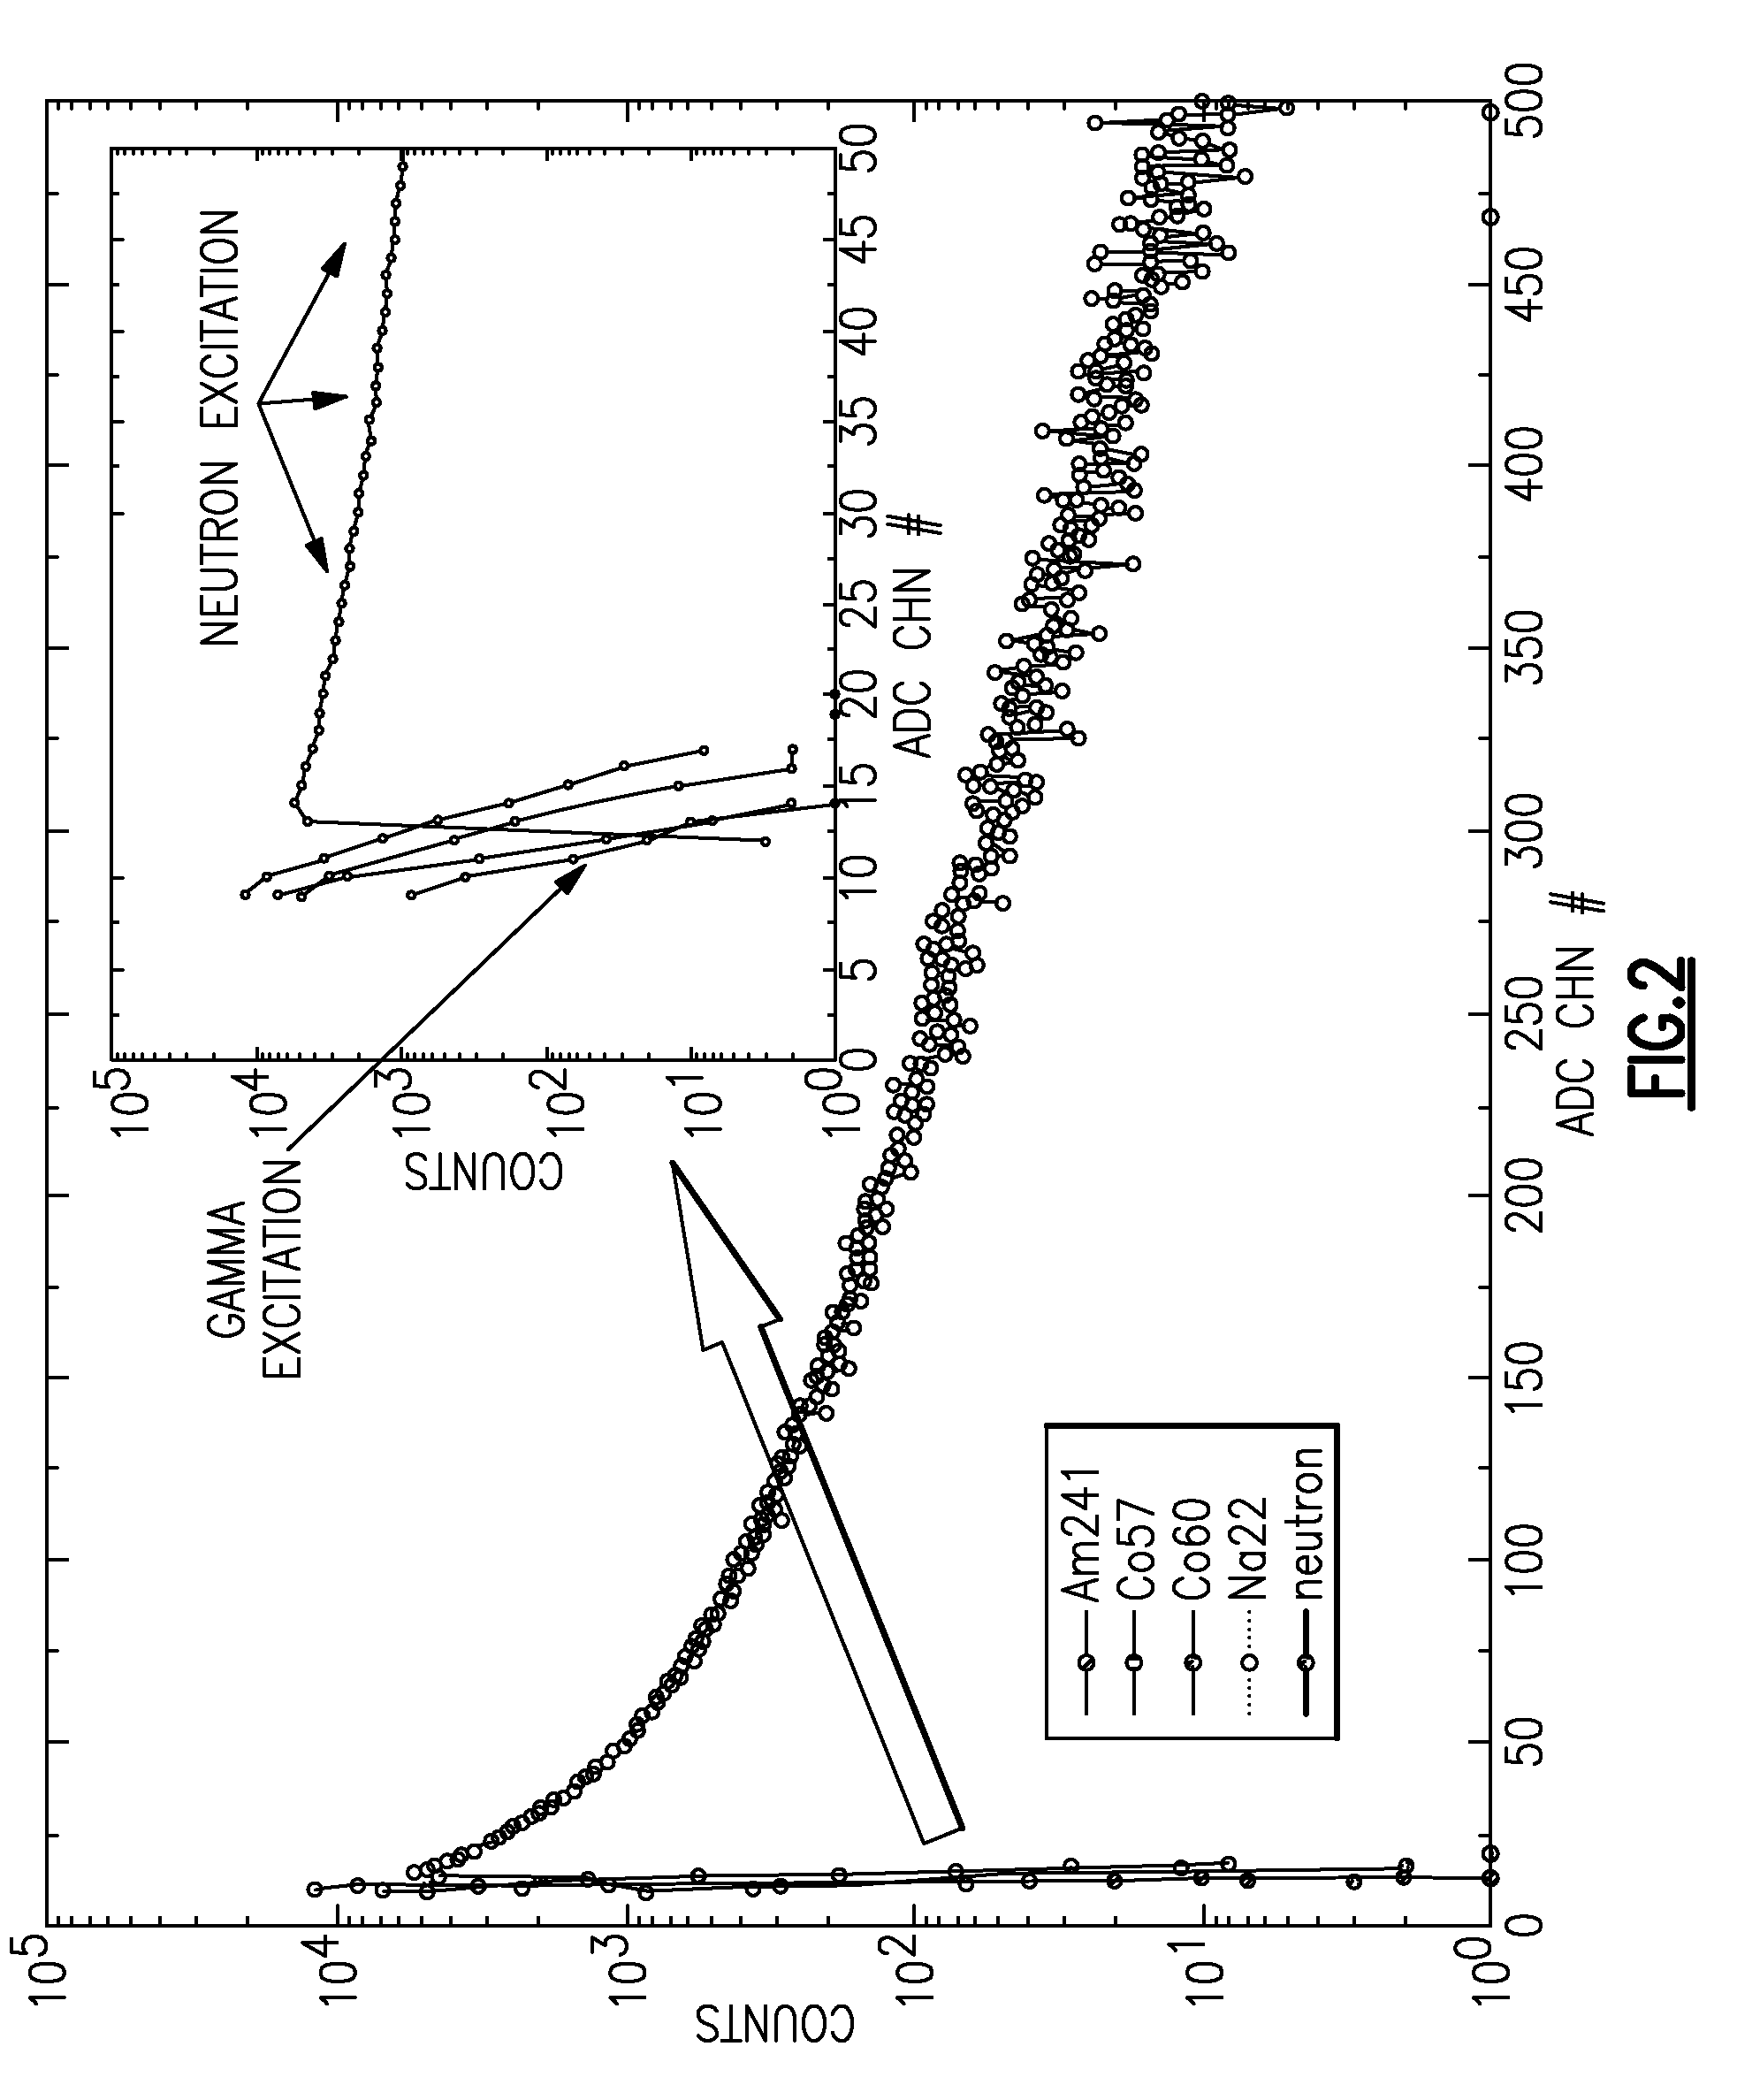 Integrated neutron-gamma radiation detector with adaptively selected gamma threshold